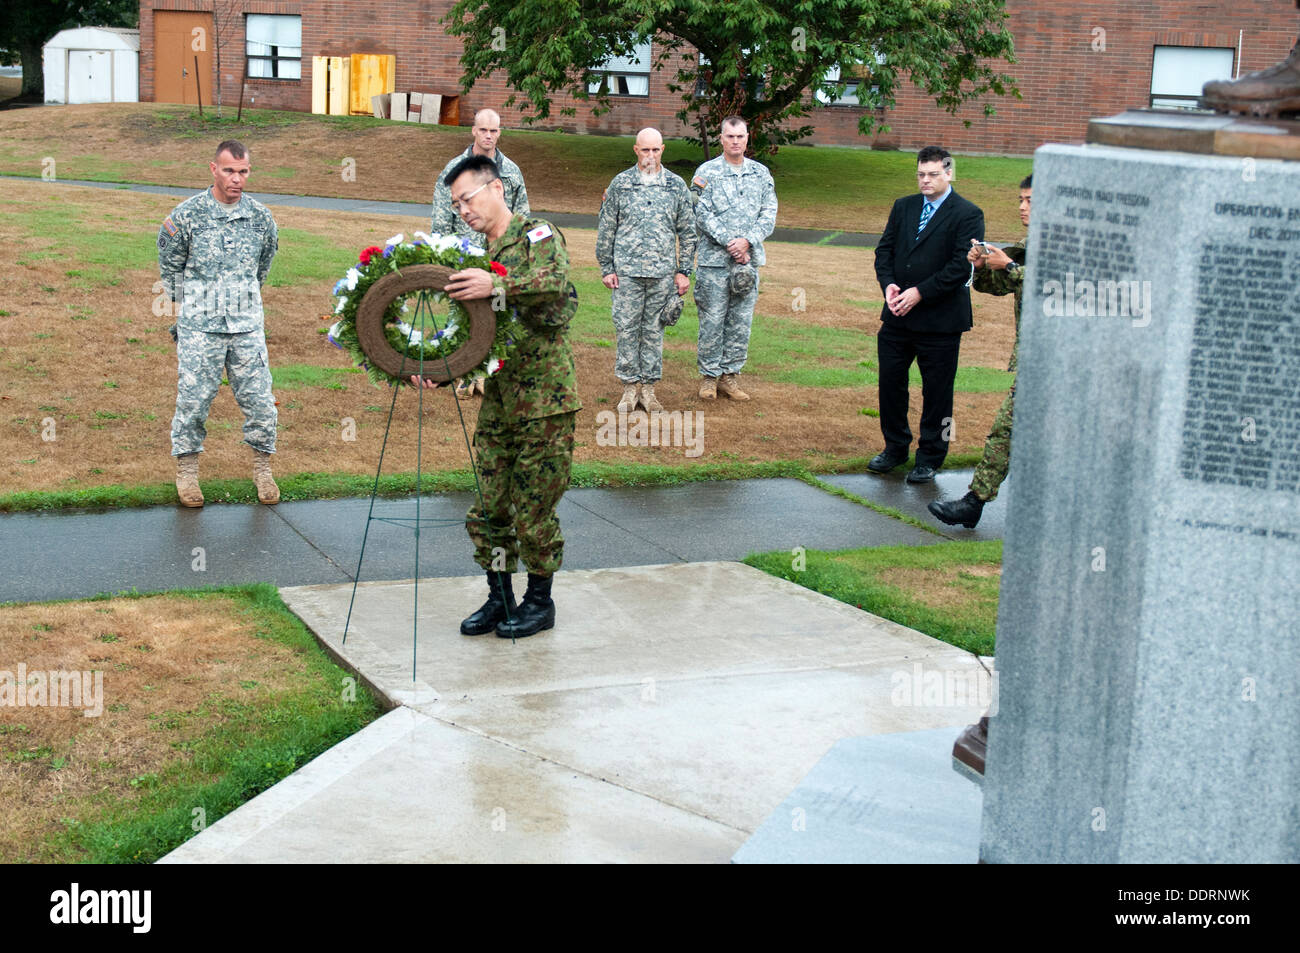 Maj. Gen. Omori (center), deputy commanding general, 4th Division, Northern Army, Japanese Ground Self-Defense Force, places a wreath at the Arrowhead Brigade Memorial as a sign of respect to the fallen Soldiers of the Arrowhead Brigade, Sept. 3, 2013. So Stock Photo